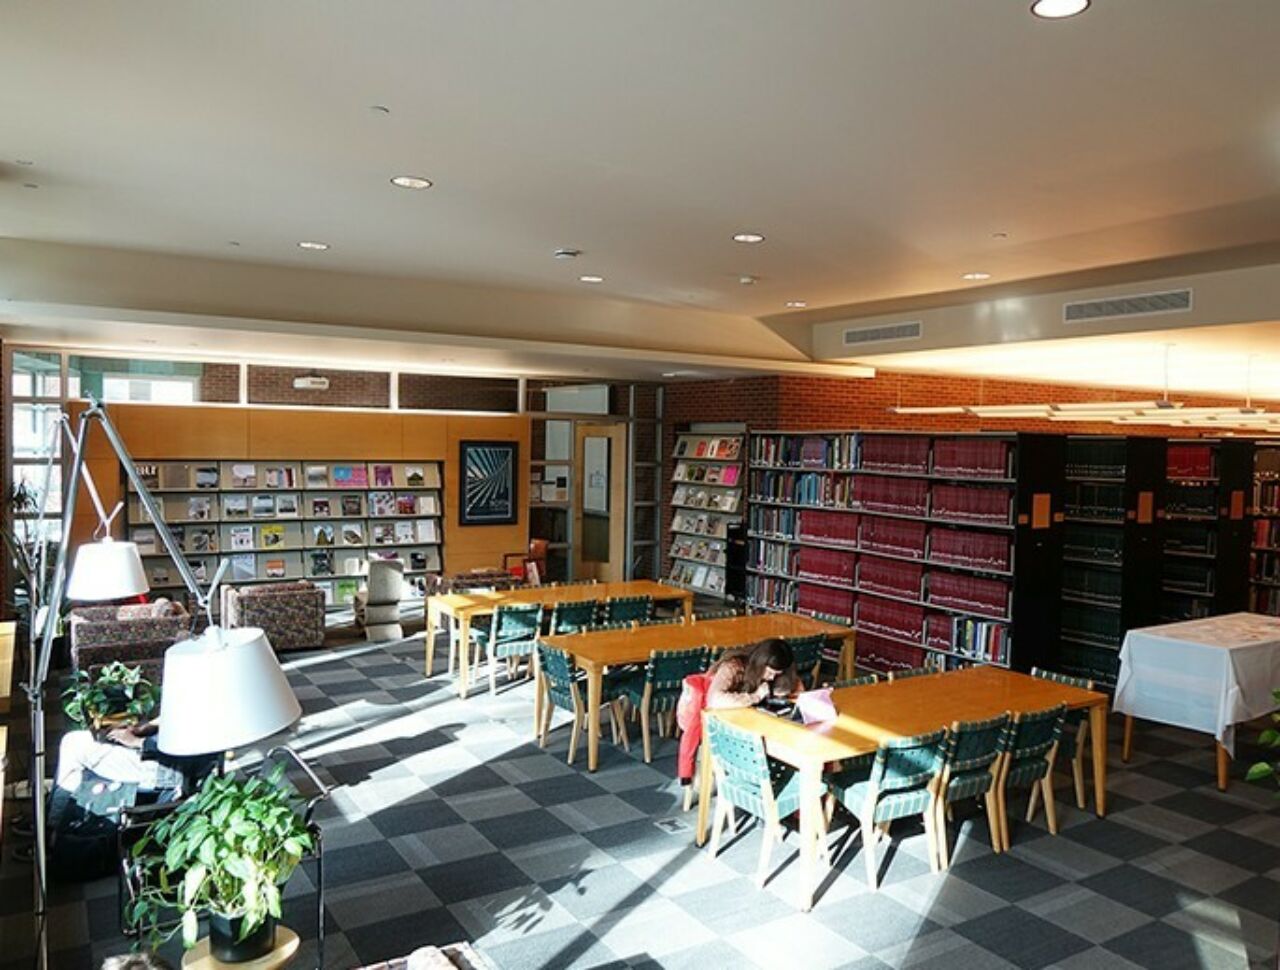 Inside view of the library with window light coming in from the left, students working at tables in the foreground, meeting space in the back, and stacks of books to the right.